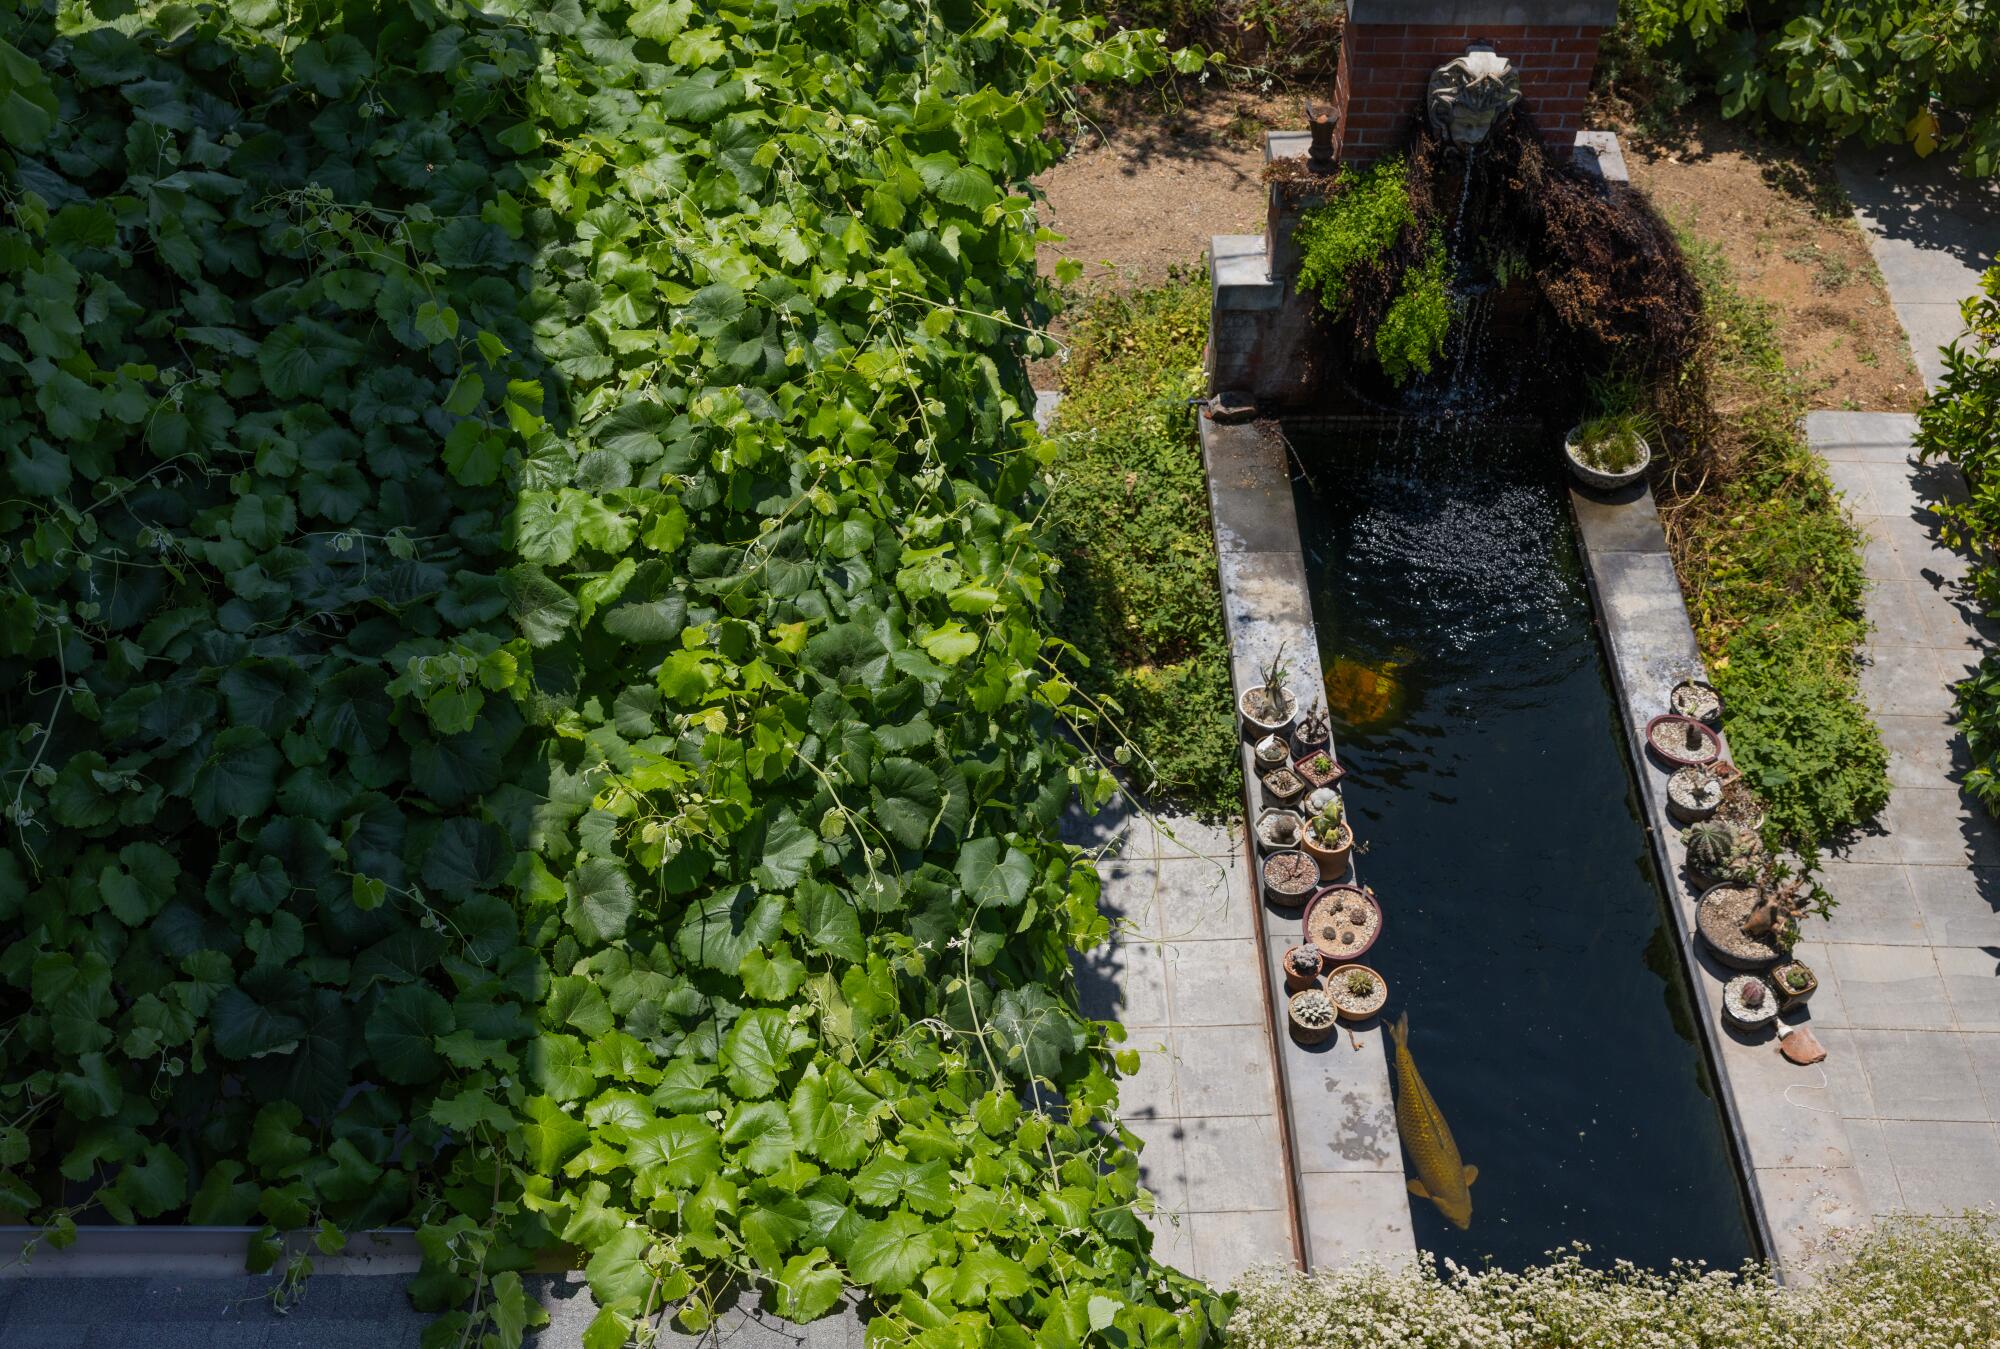 An overhead view of a koi pond with greenery around it.